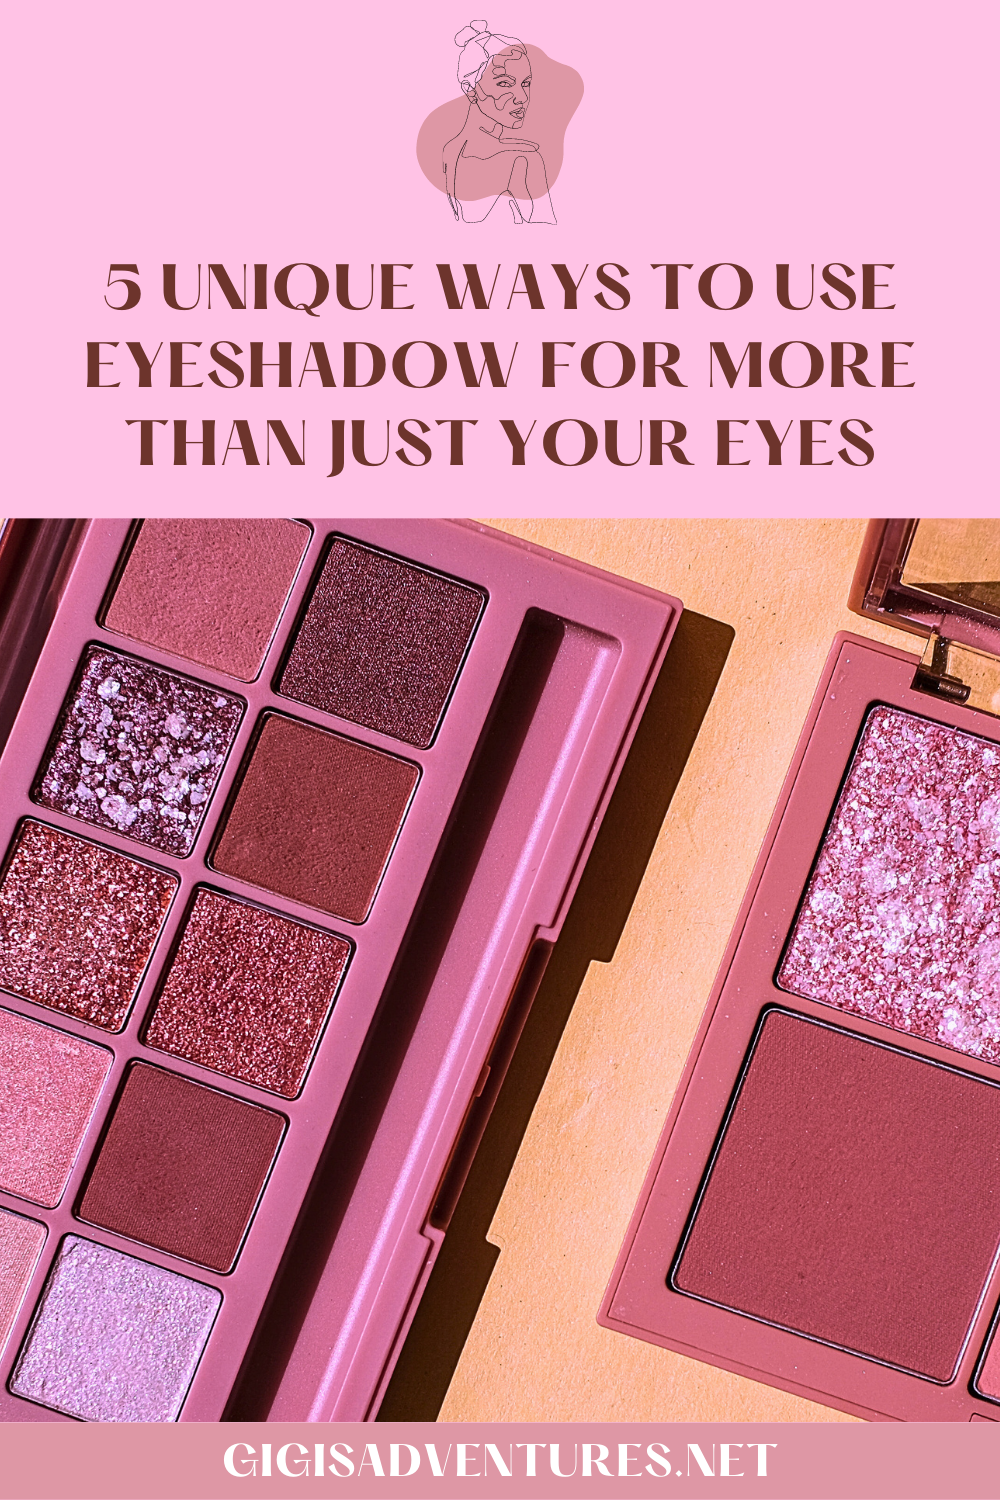 5 Unique Ways to Use Eyeshadow for More Than Just Your Eyes | DIY Makeup